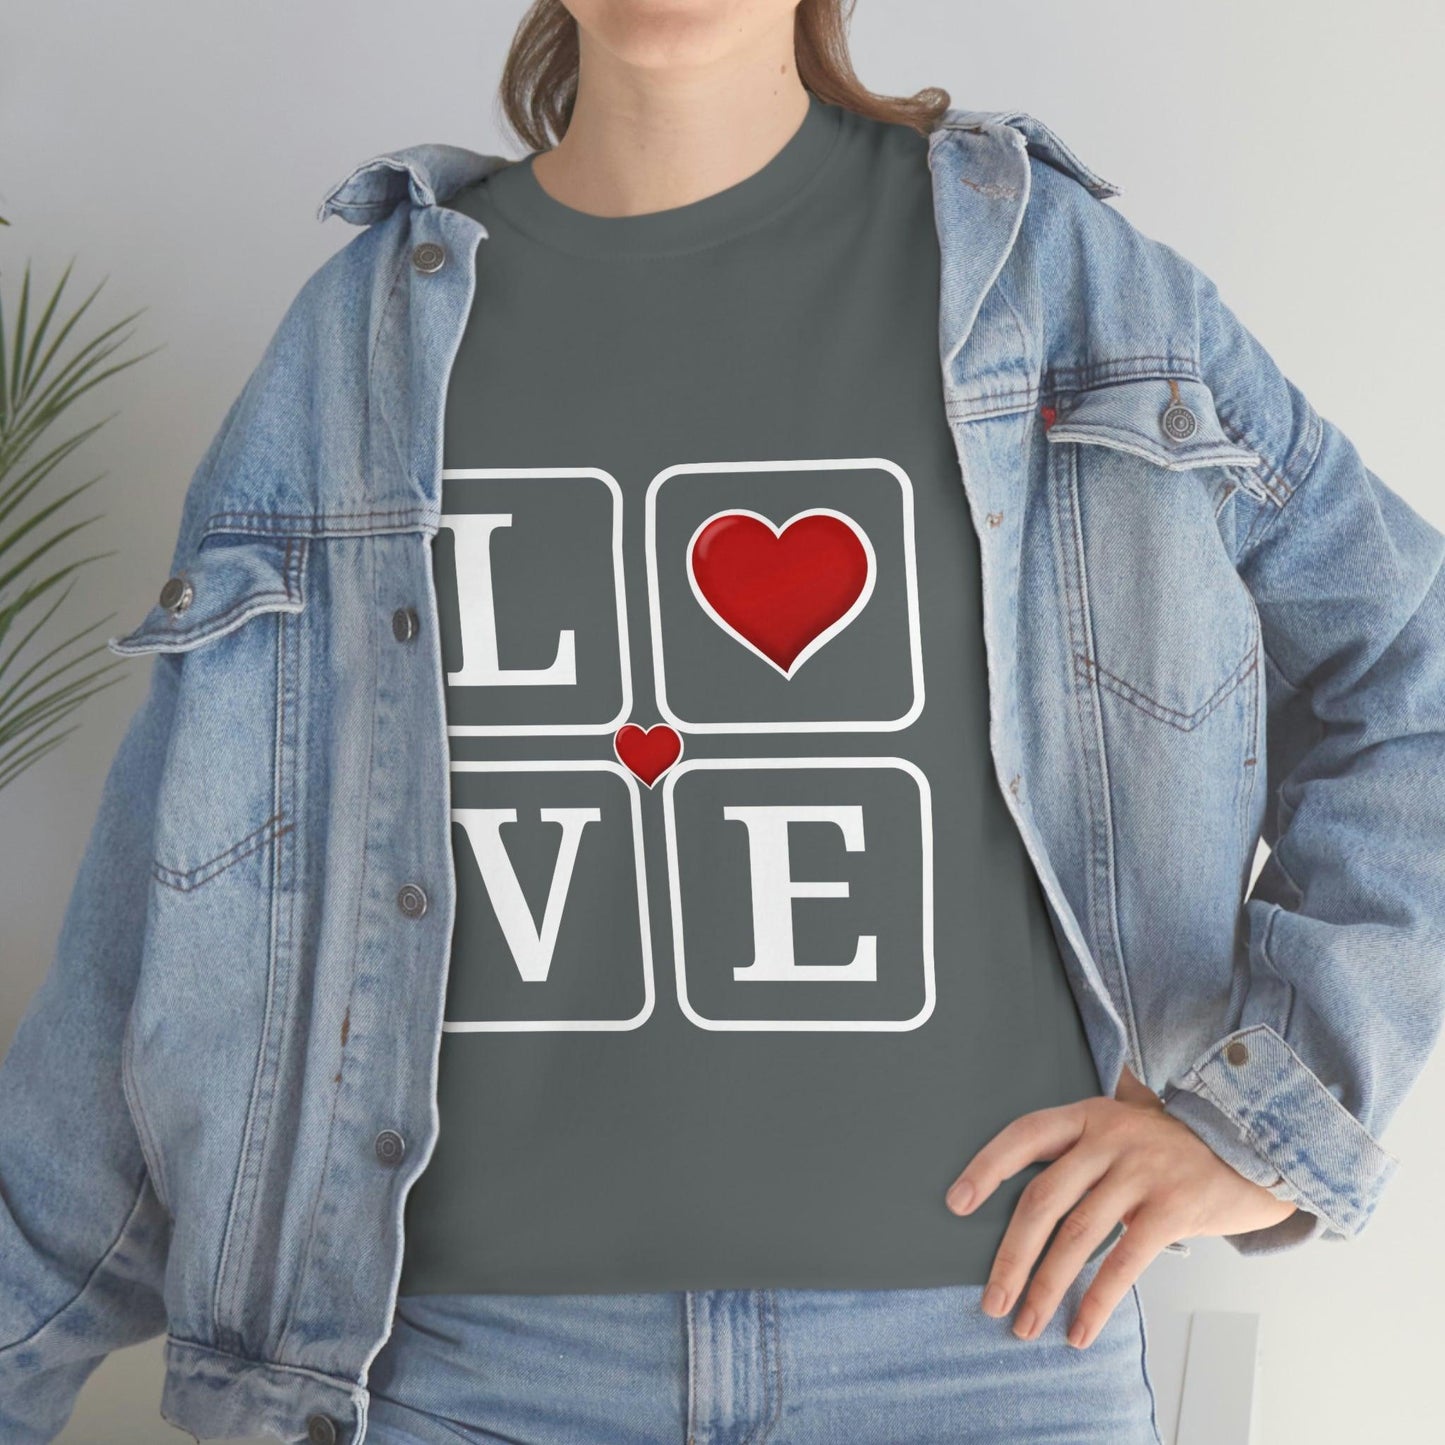 Love square Hearts Shirt, Great Gift for Valentine's day, birthday, engagement, anniversary and many more